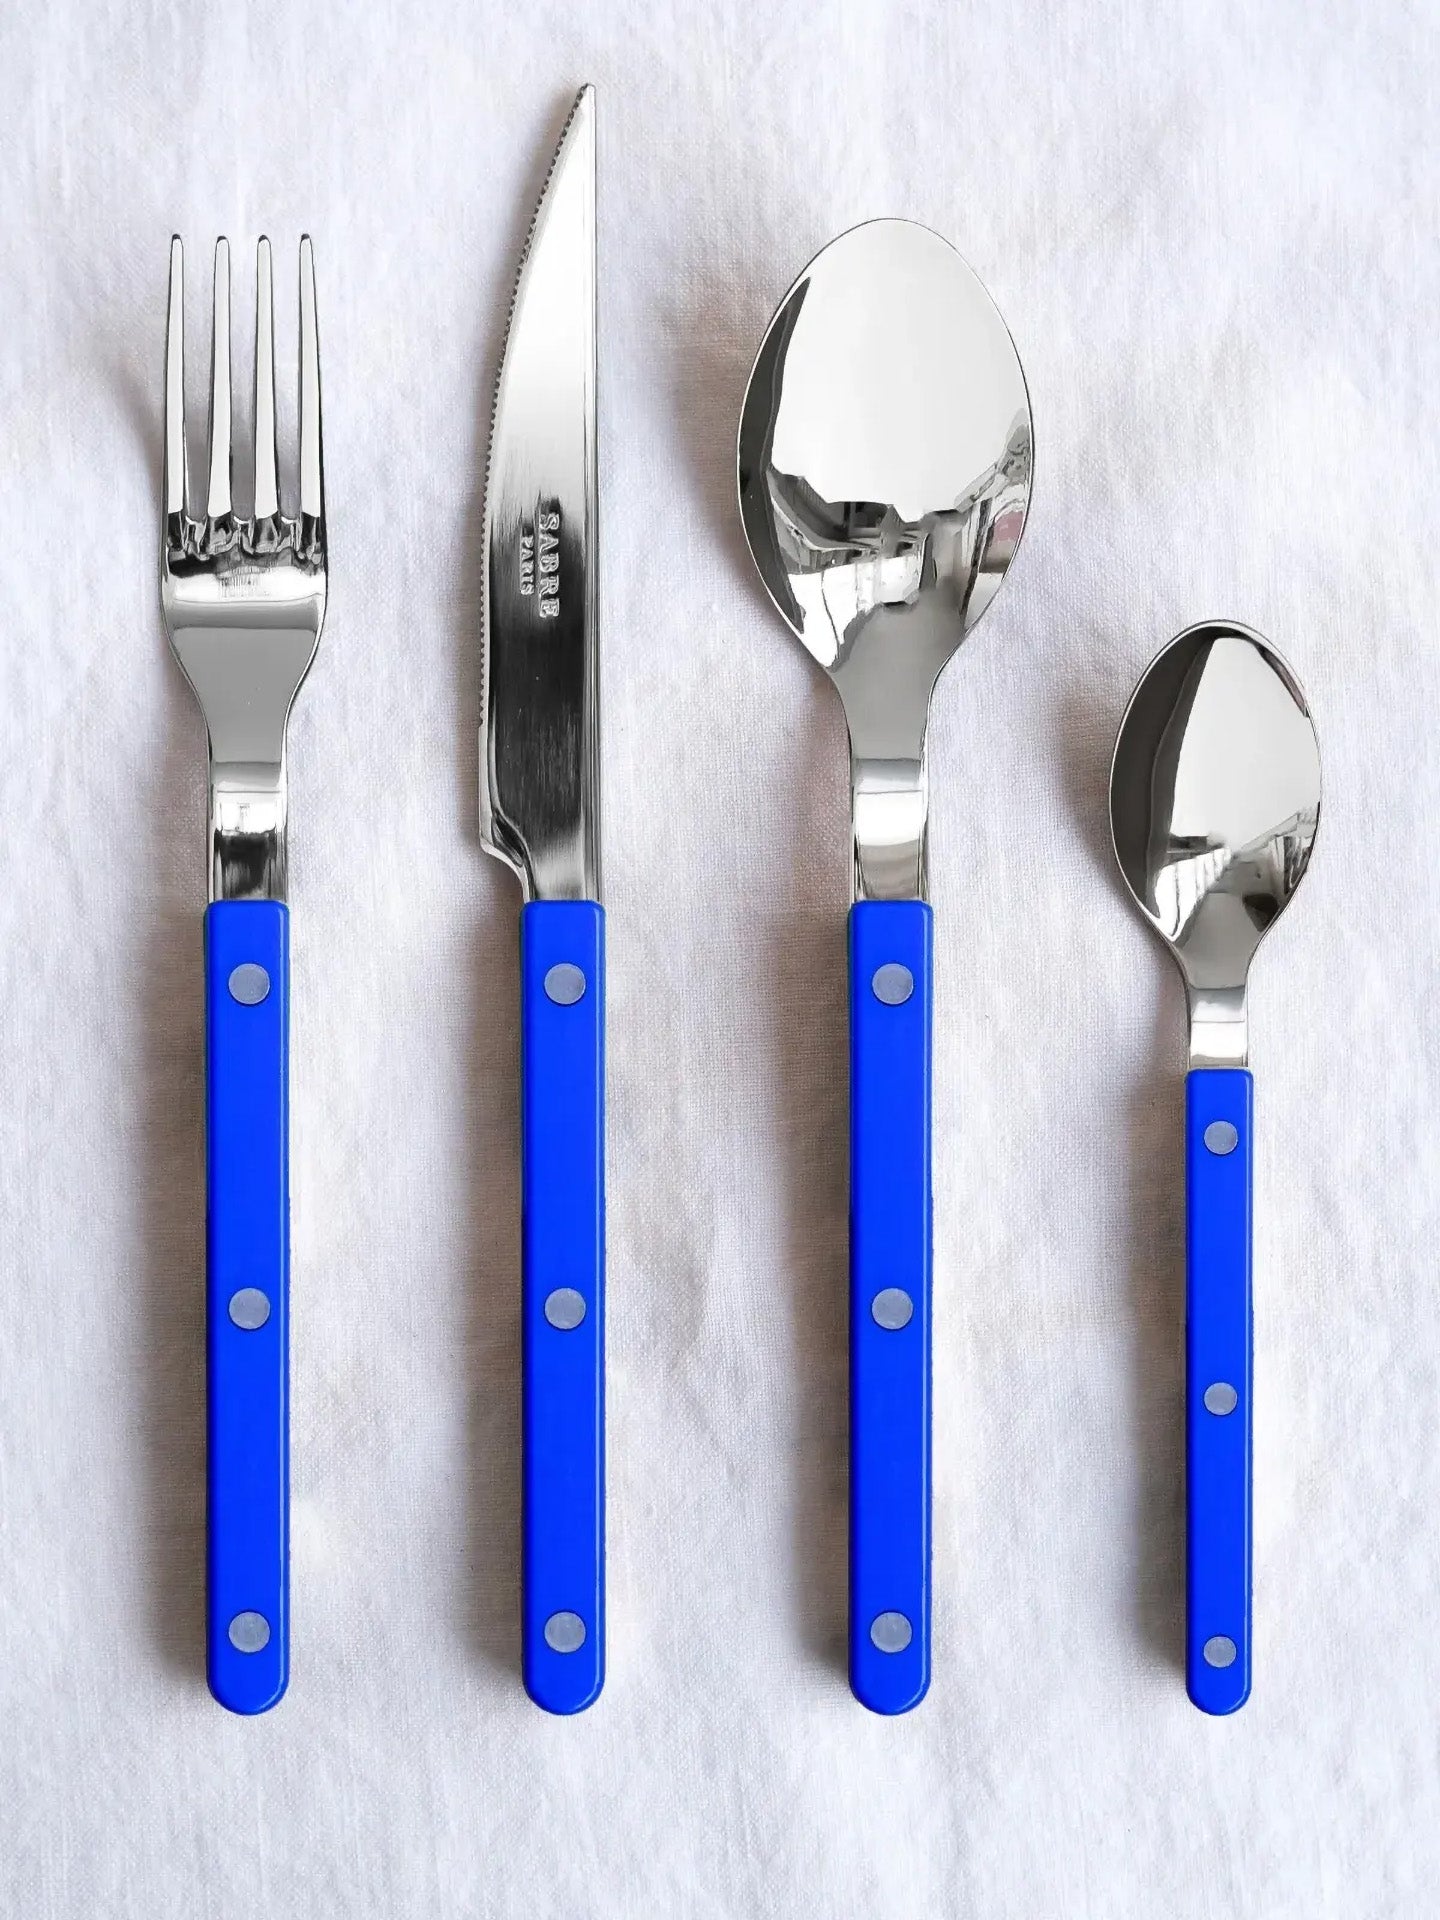 The lapis blue in the Bistrot series is just so beautiful, a true blue, classic and bright enough to pop a bit: the look of the cutlery is sophisticated and practical